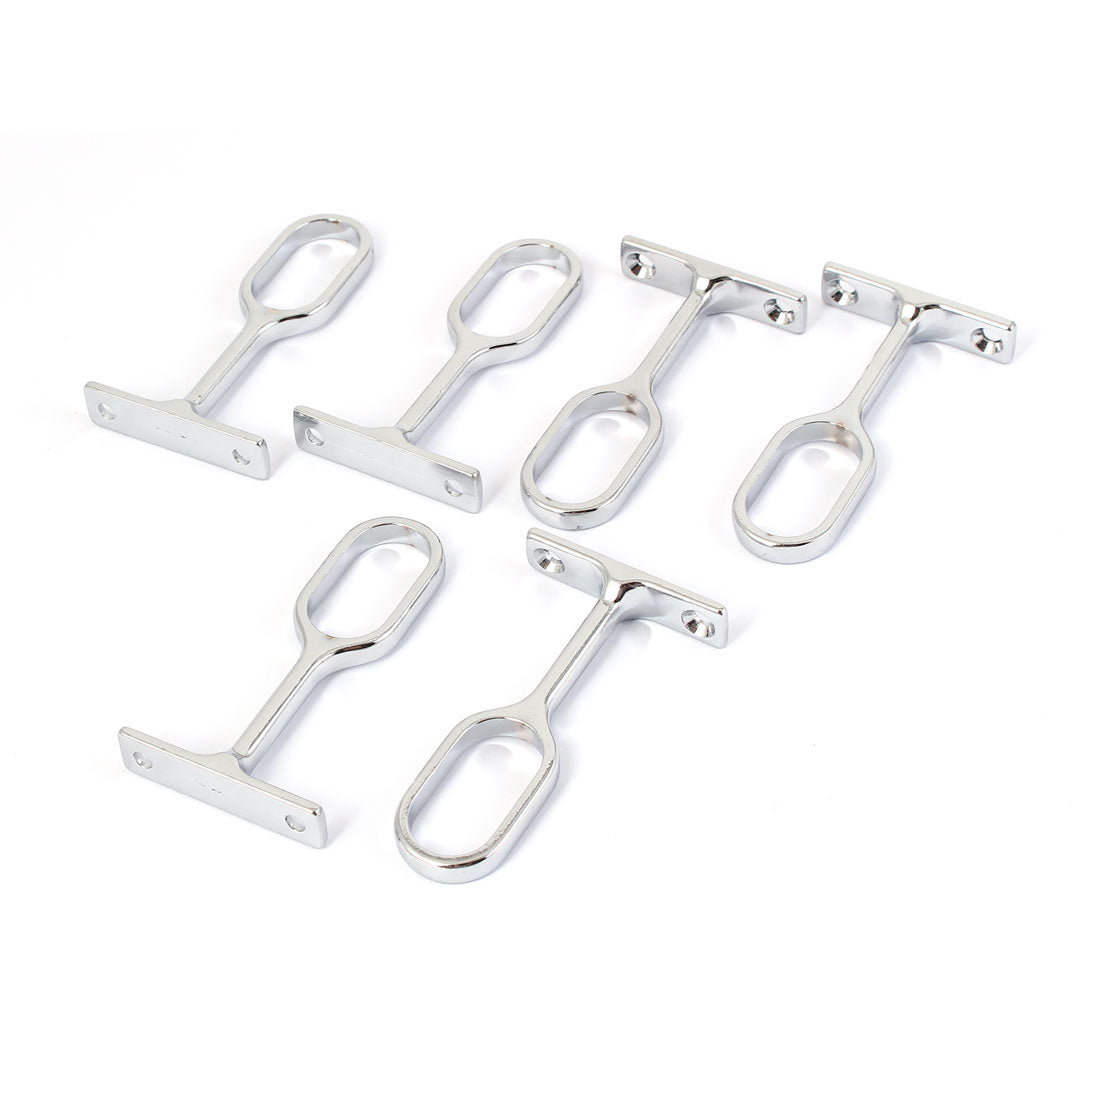 uxcell Uxcell Clothes Closet Rod Flange Holder Support Bracket 6PCS for 30mm x 16mm Oval Pipe